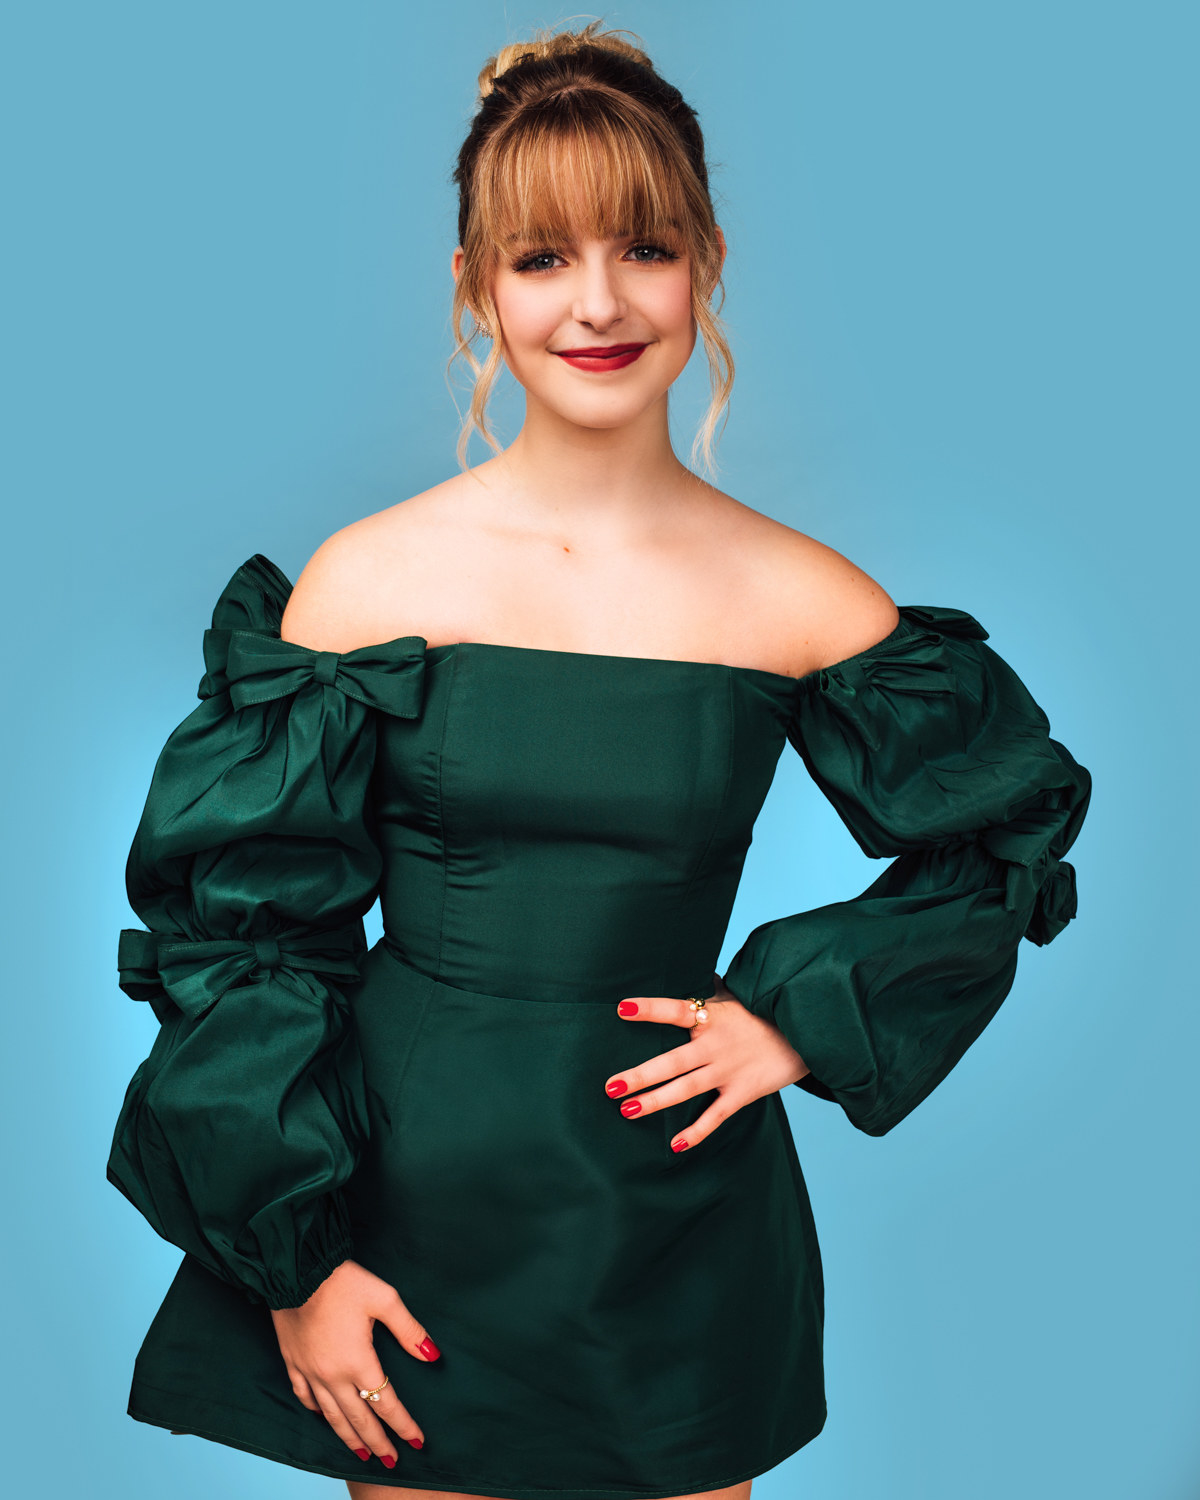 McKenna poses with her hand on her hip while wearing a short off-the-shoulder dress with long sleeves embellished with bows